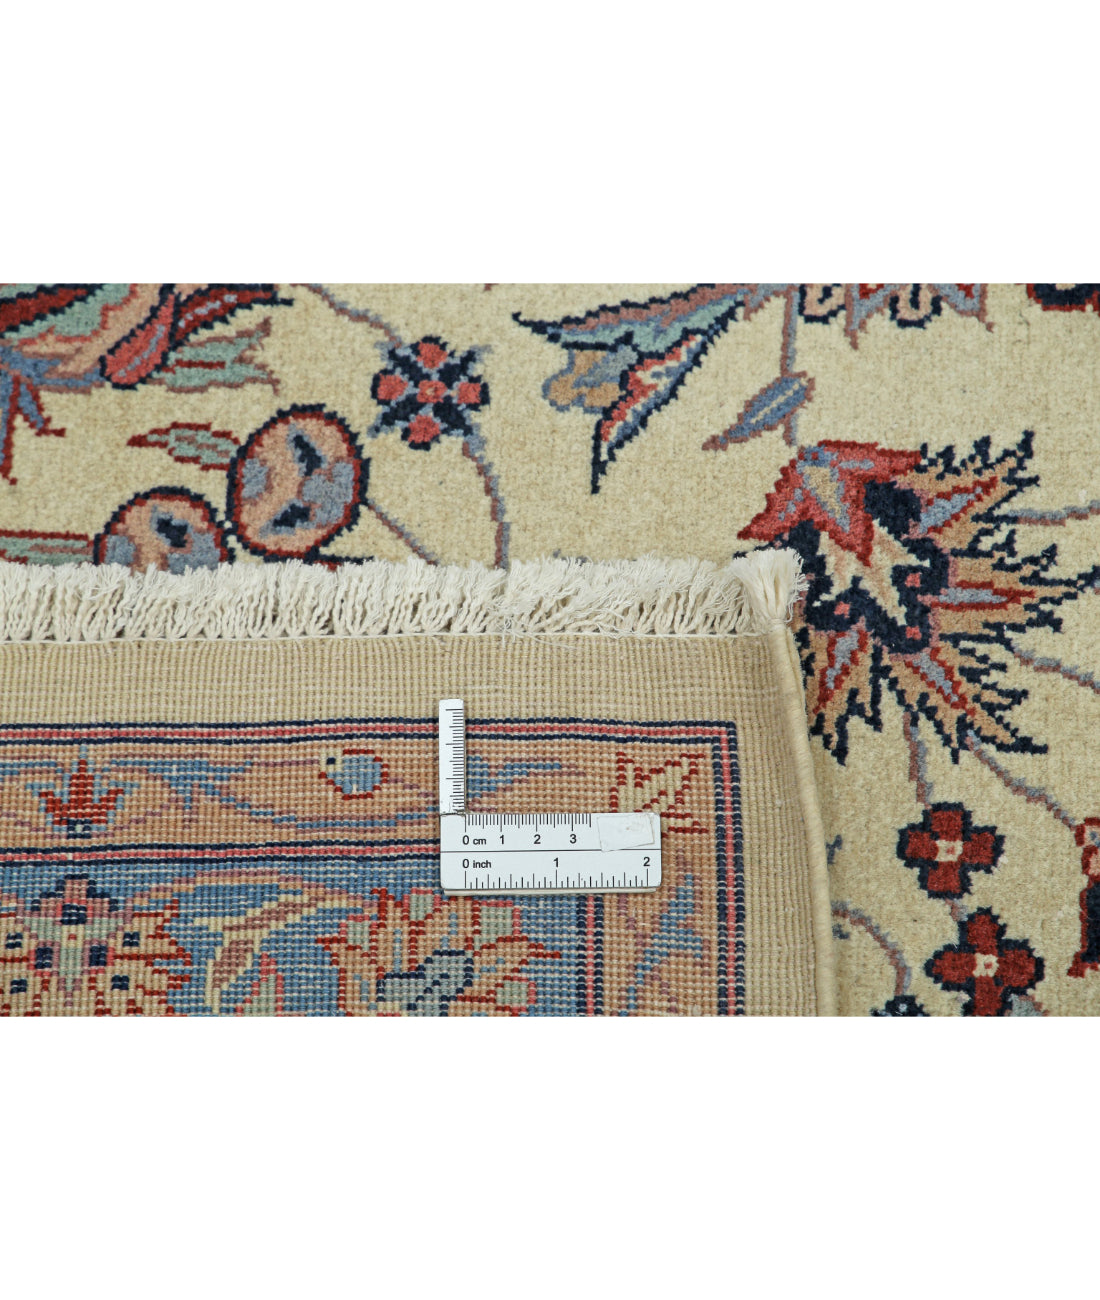 Heritage 8'1'' X 11'5'' Hand-Knotted Wool Rug 8'1'' x 11'5'' (243 X 343) / Ivory / Blue